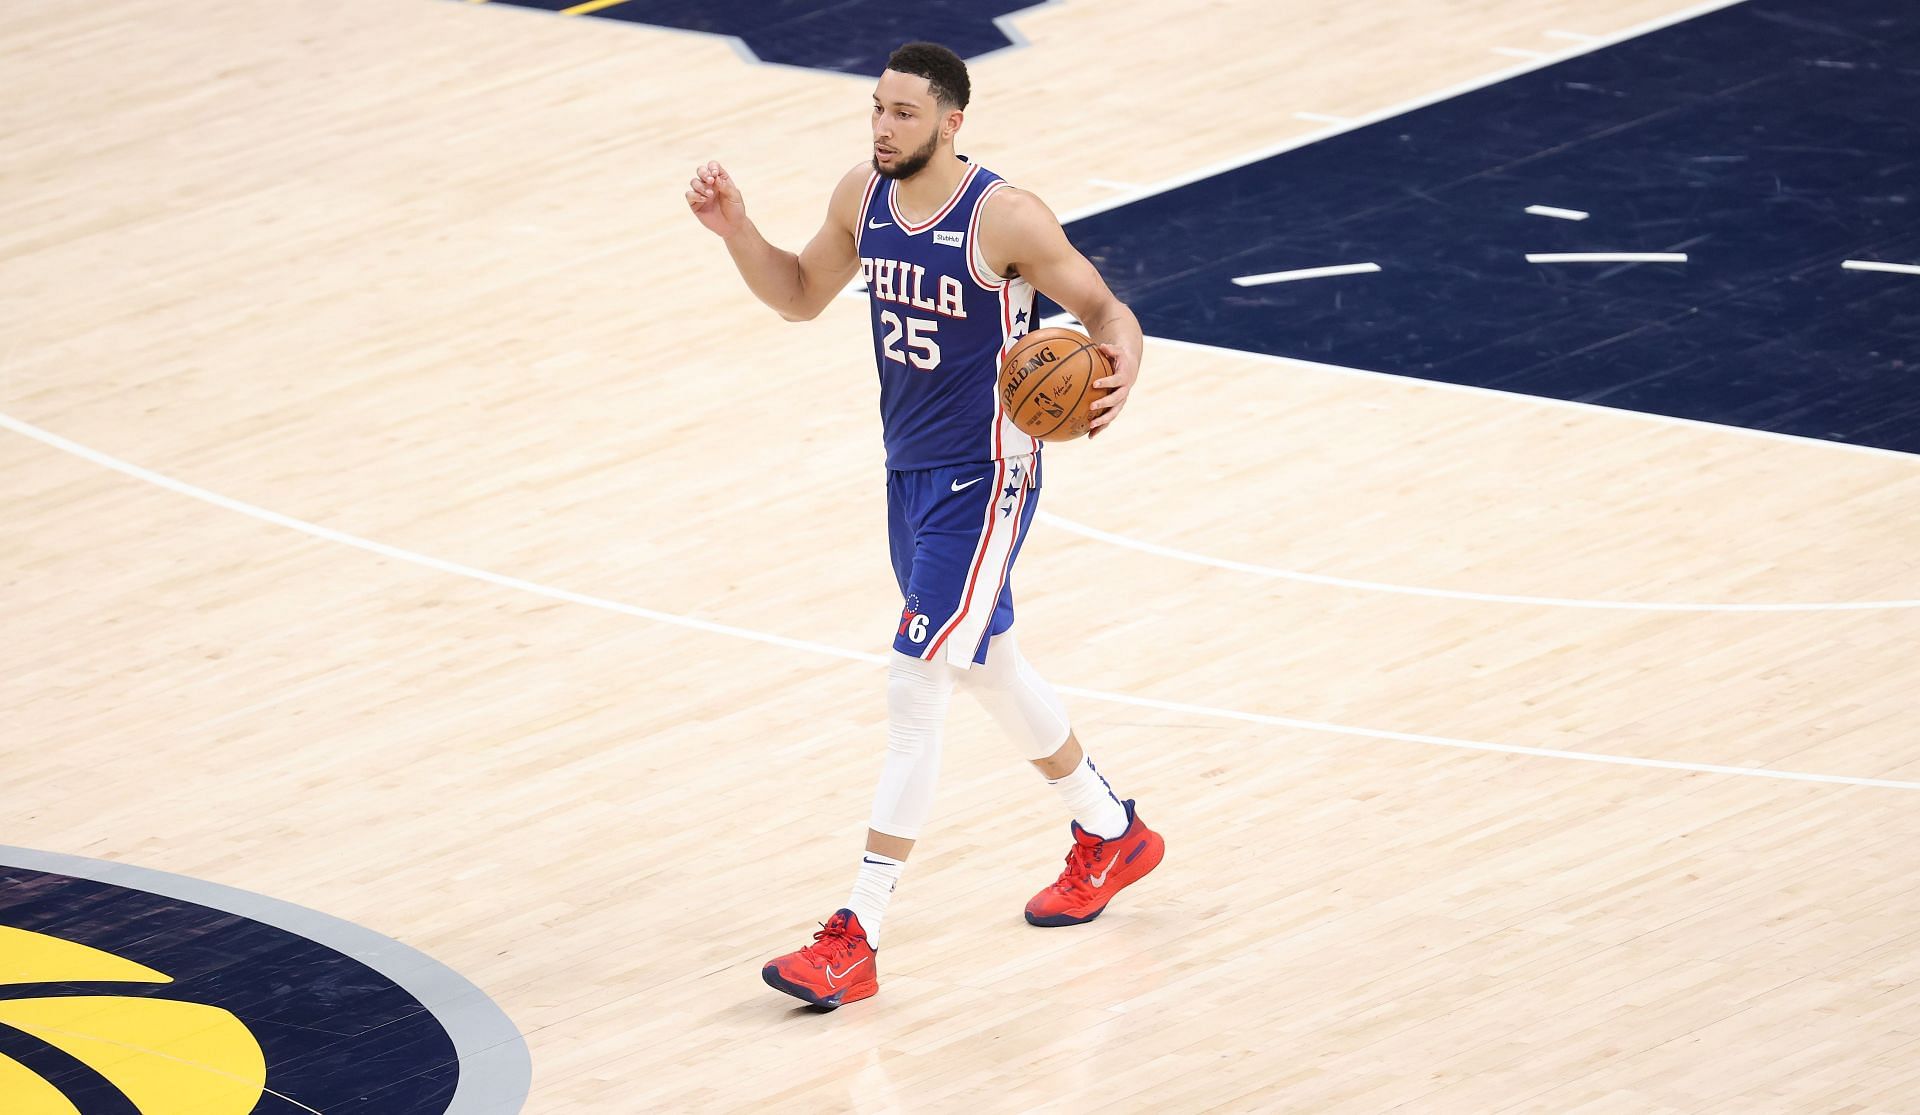 Ben Simmons surveys the court against the Indiana Pacers